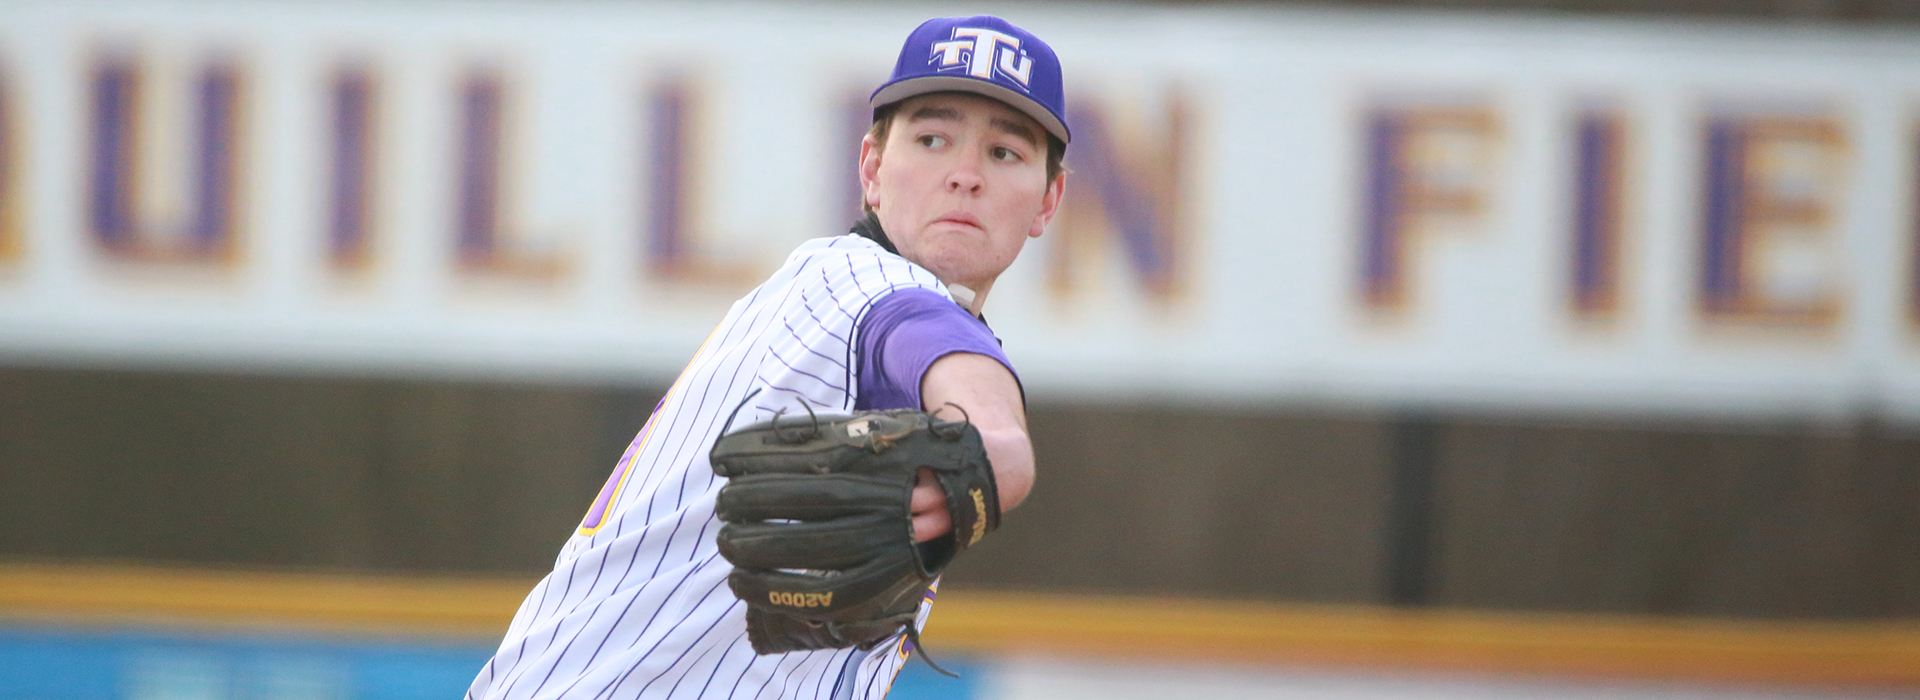 Trio of blasts back Fisher's gem in 3-2 Tech win over Morehead State